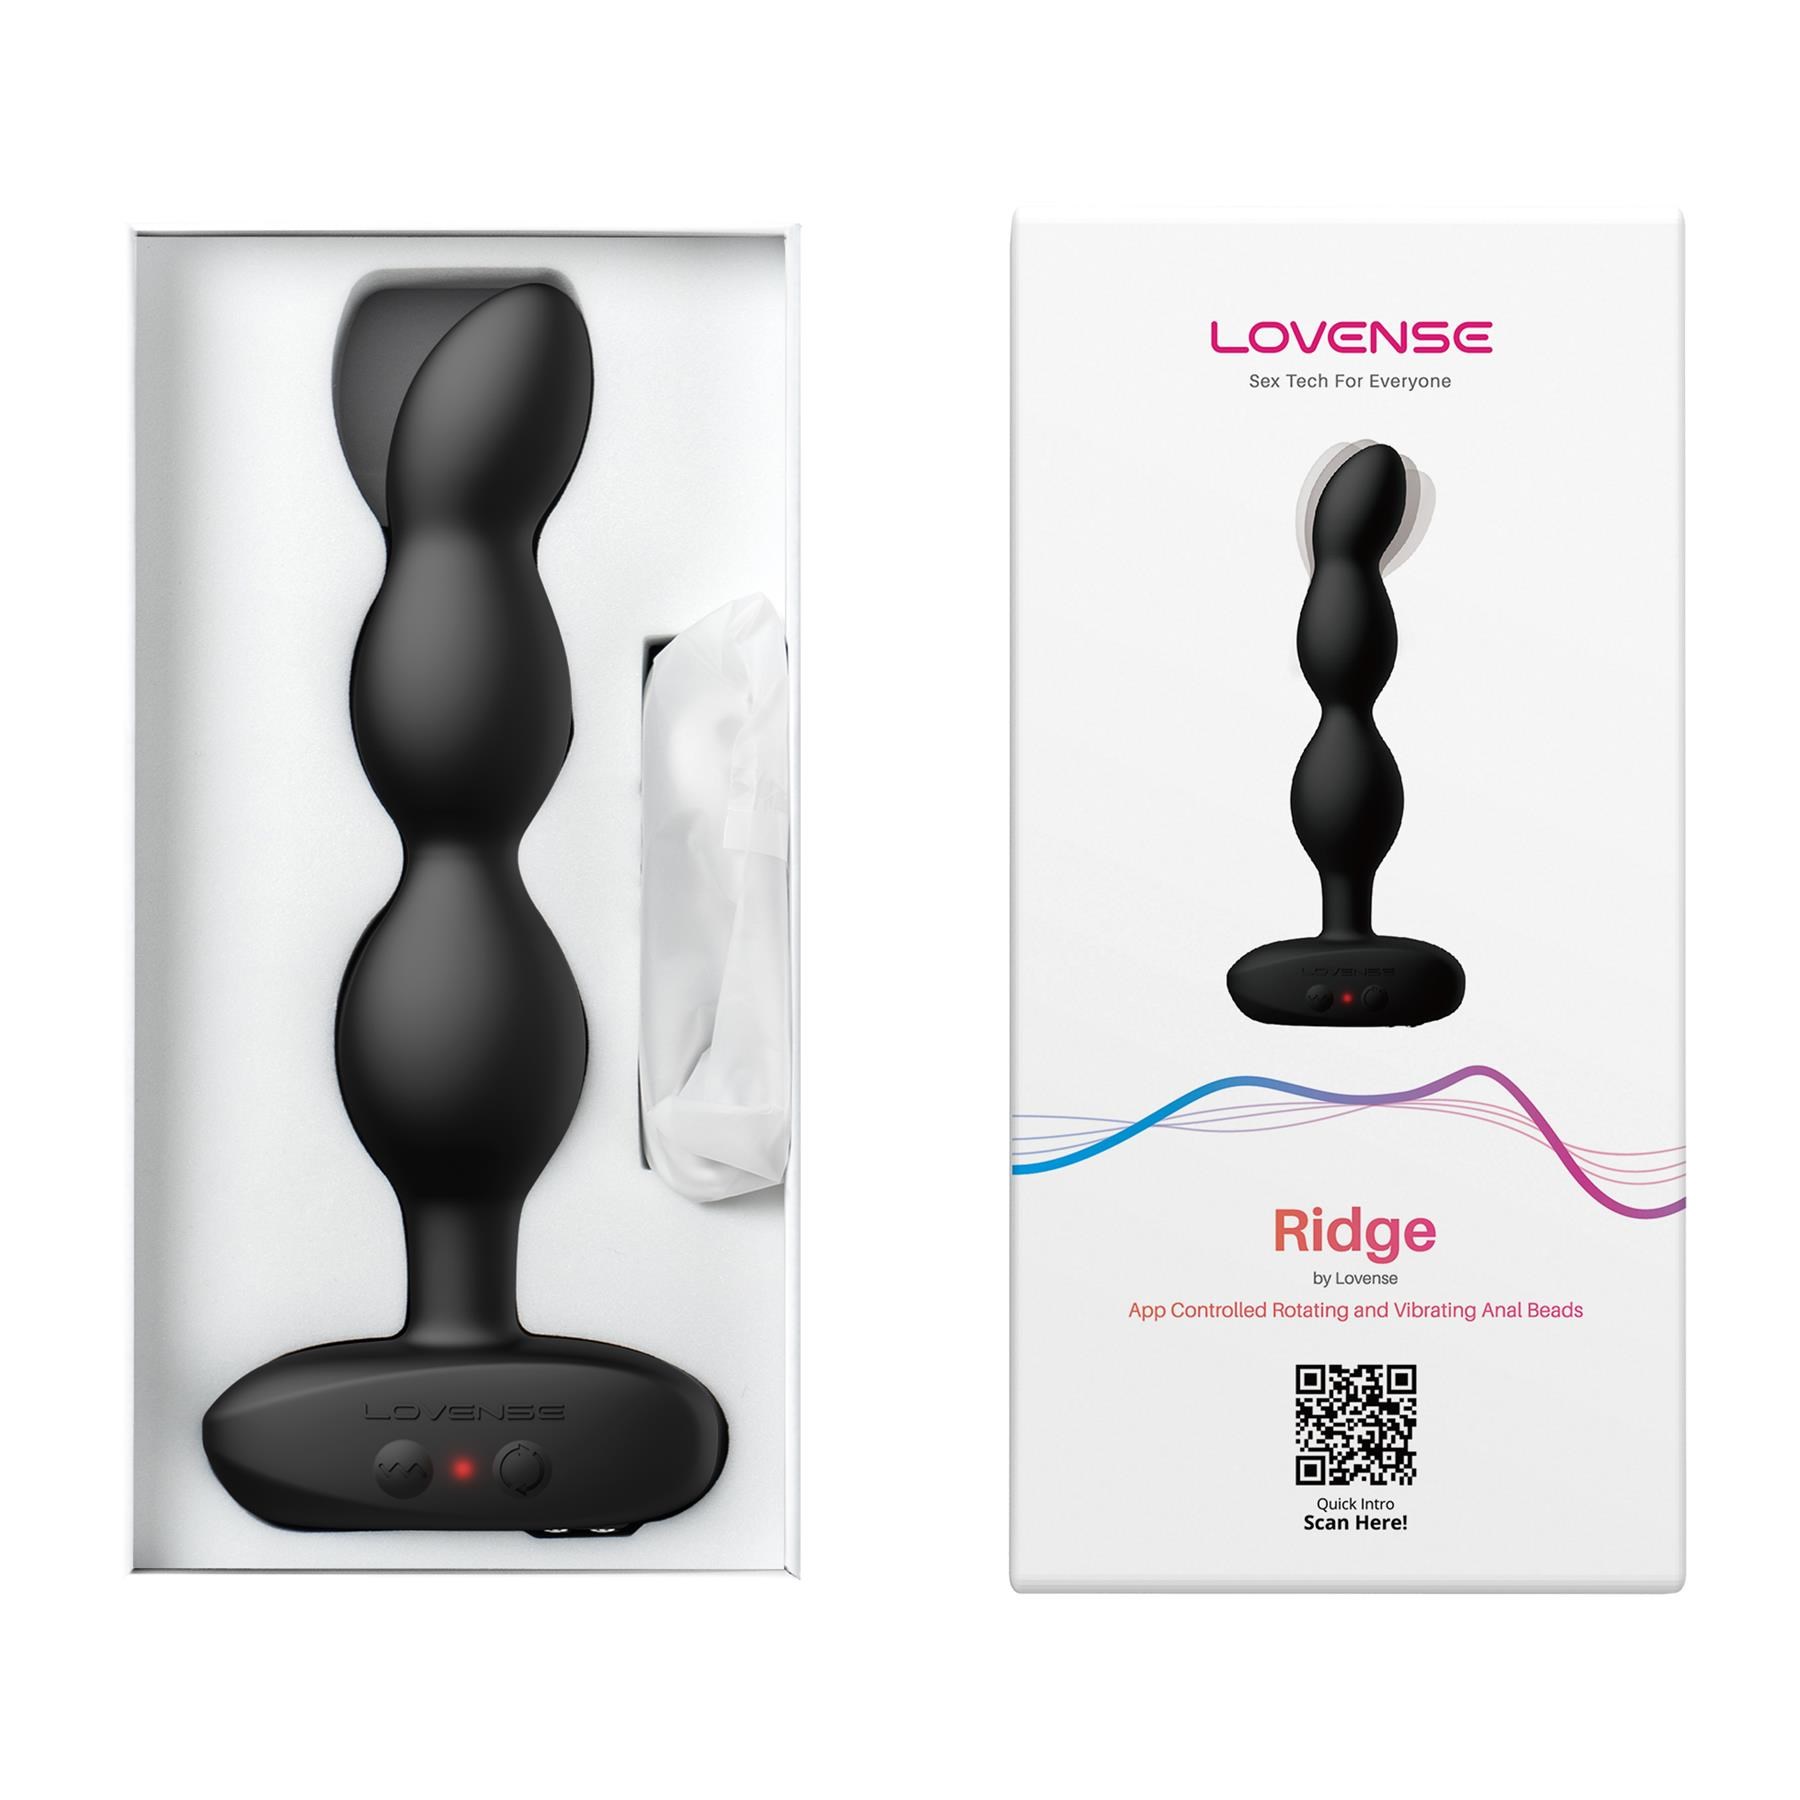 Lovense Ridge Bluetooth Rotating Anal Vibrator - Product and Packaging